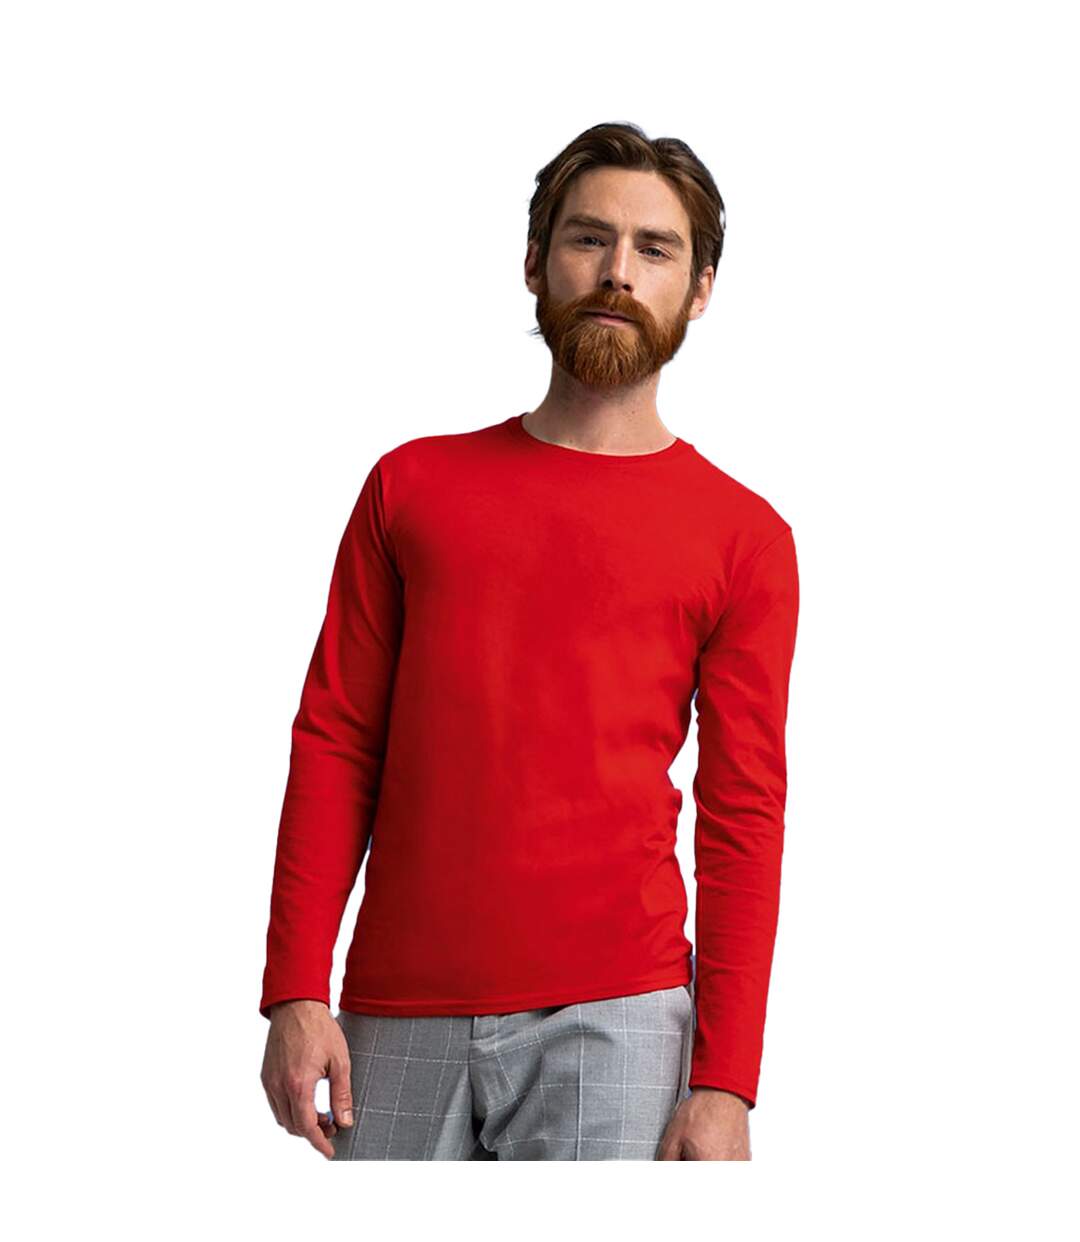 Fruit of the Loom Mens Iconic Long-Sleeved T-Shirt (Red)